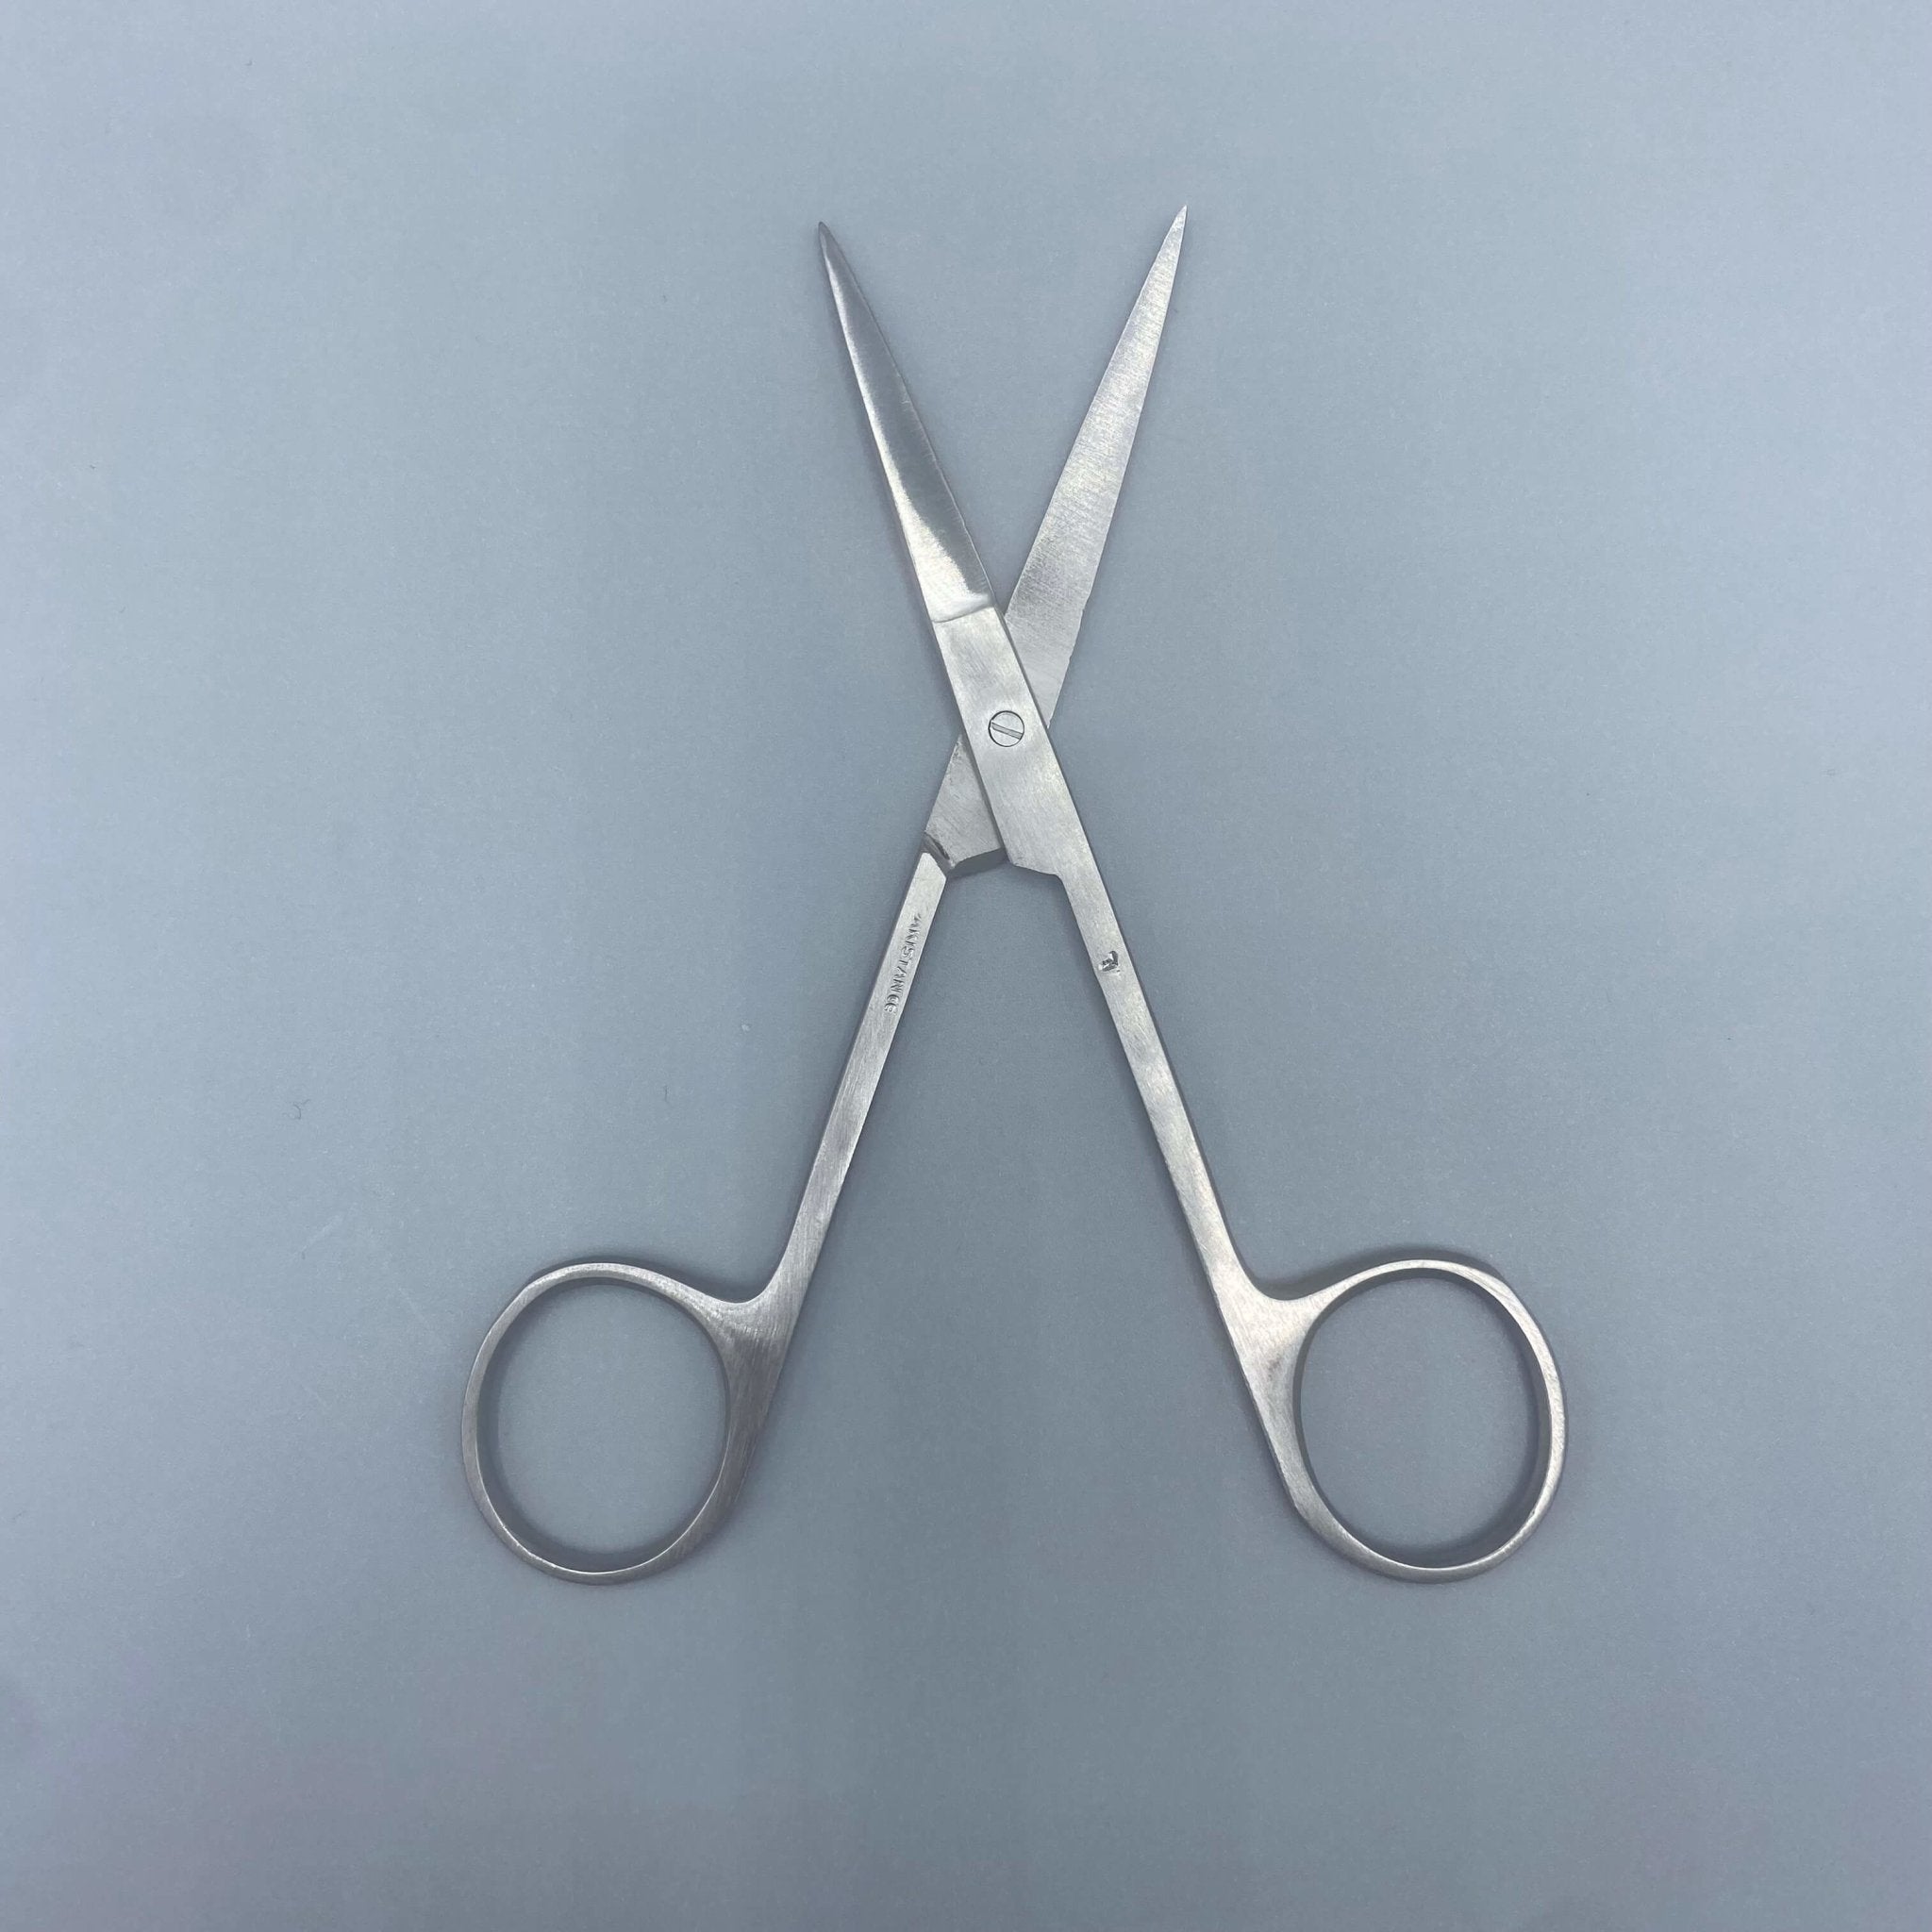 Surgical Scissors Made in USA  Bianco Instruments Bandage, Iris, and Felt  Shears